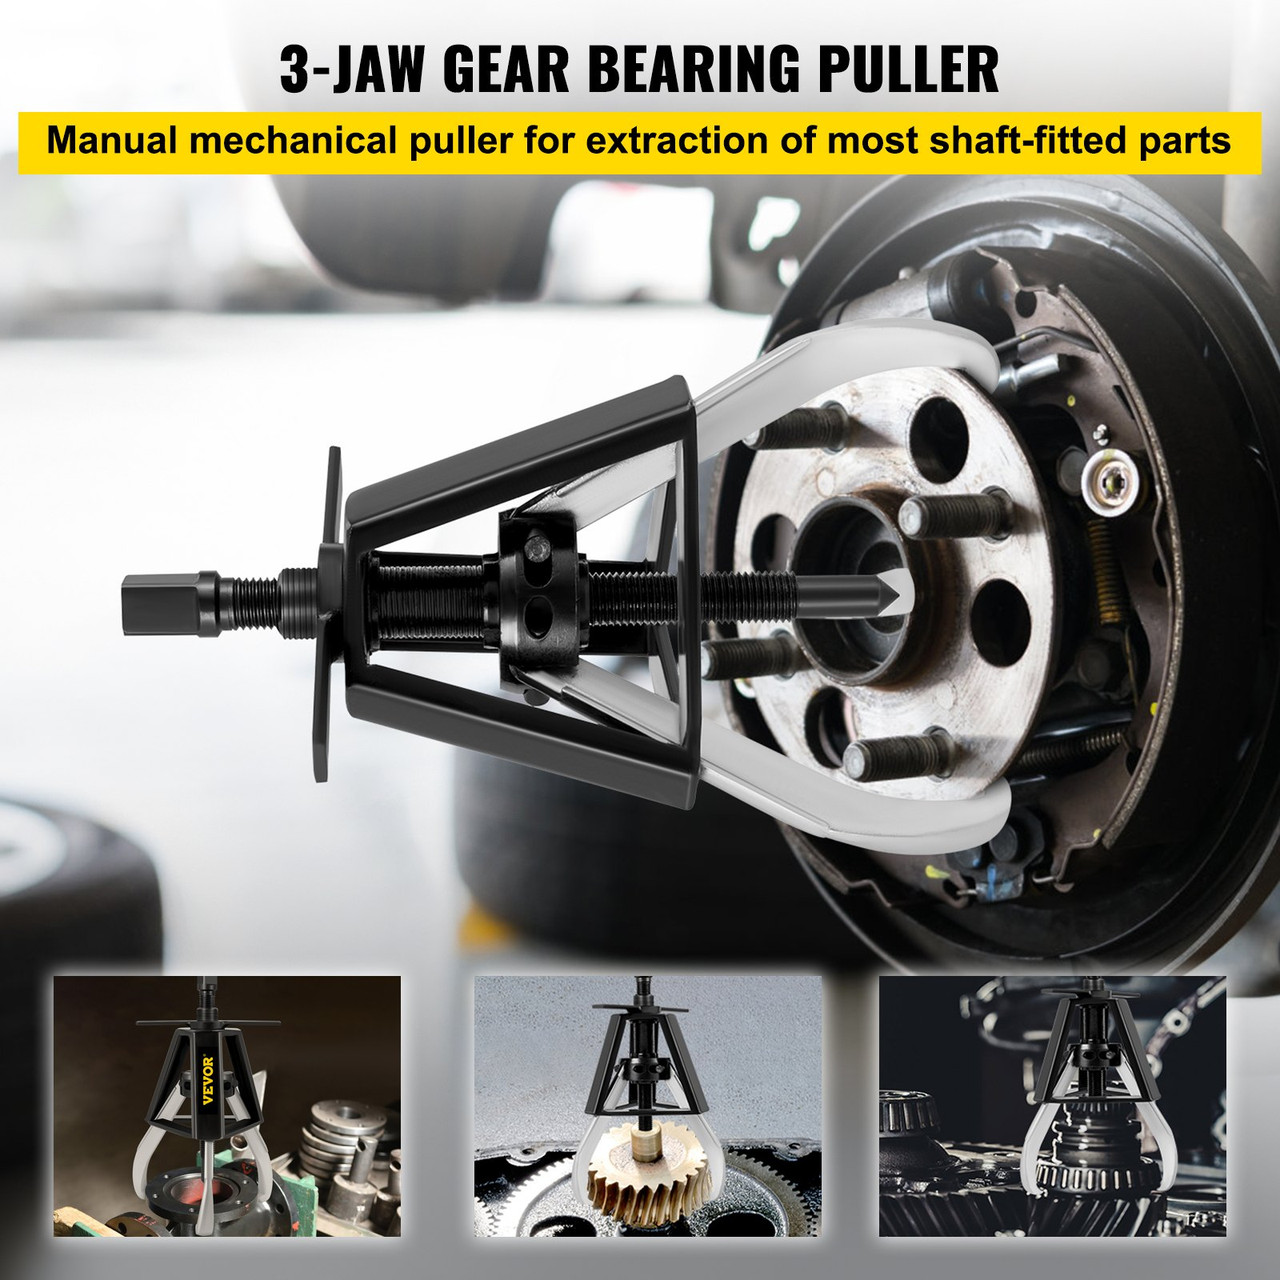 3 Gear Jaw Puller, 5 Ton/11020 LBS Capacity Manual Puller,13" - 21.6" Spread Reach and 3.9" - 7.9" Spread Range, 11" Lead Screw Length Gear Removal Tools For Slide Gears, Pulleys, and Flywheels